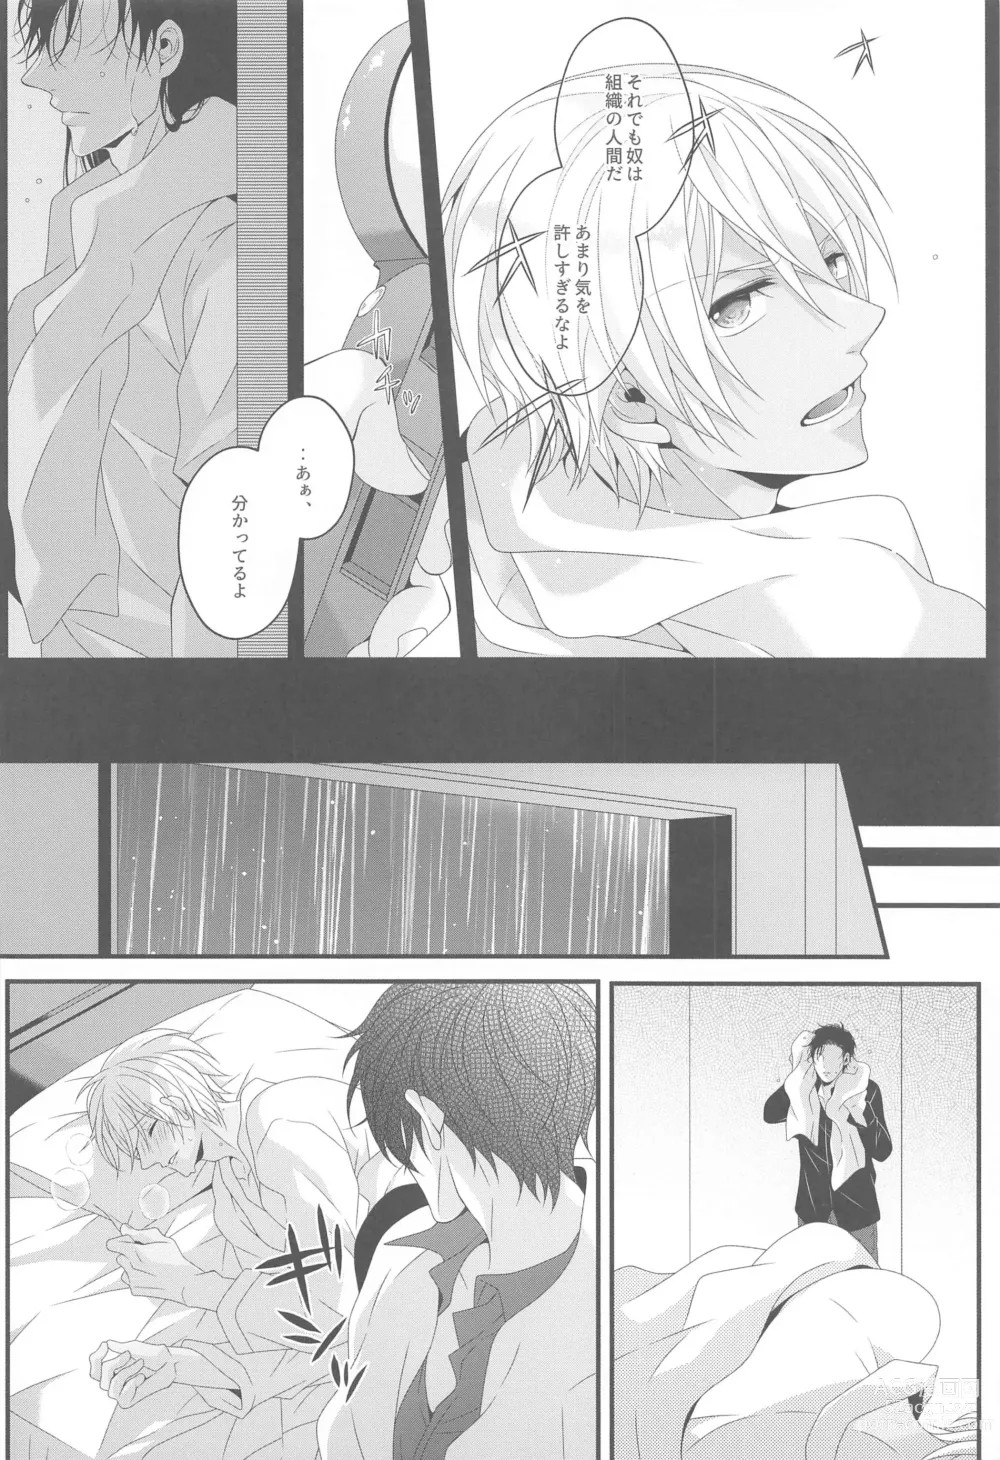 Page 9 of doujinshi Aibetsuriku no Yosame - A rainy night the pain of separation from loved ones